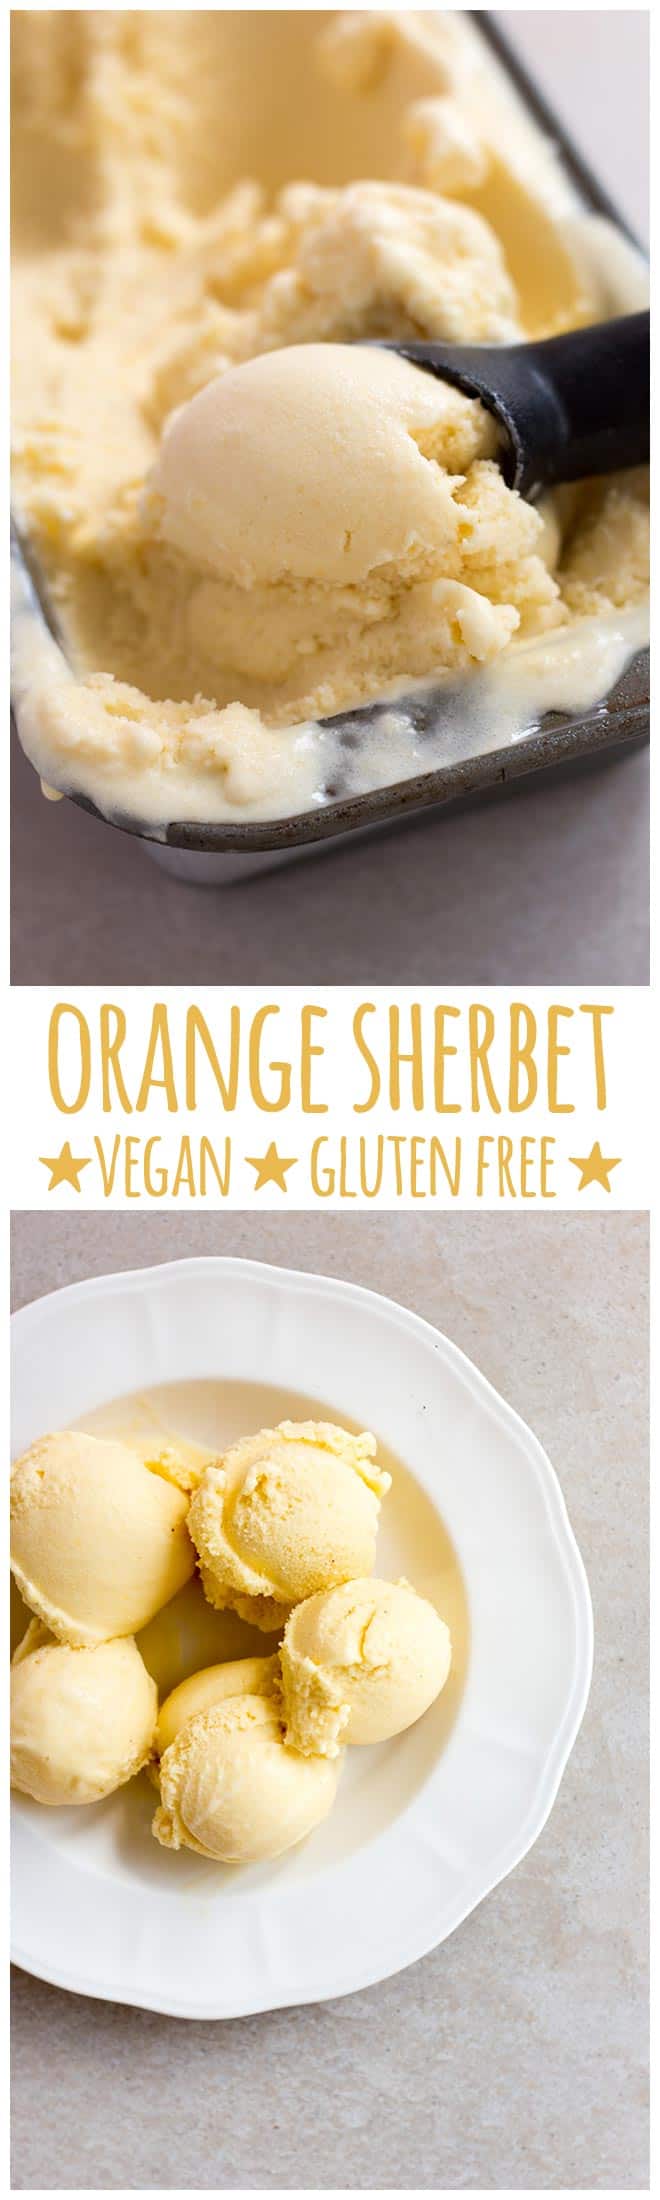 Four basic ingredients combine to make this orange and banana sherbet, a chilly summer treat that's light, fresh and creamy. Vegan and gluten free. 